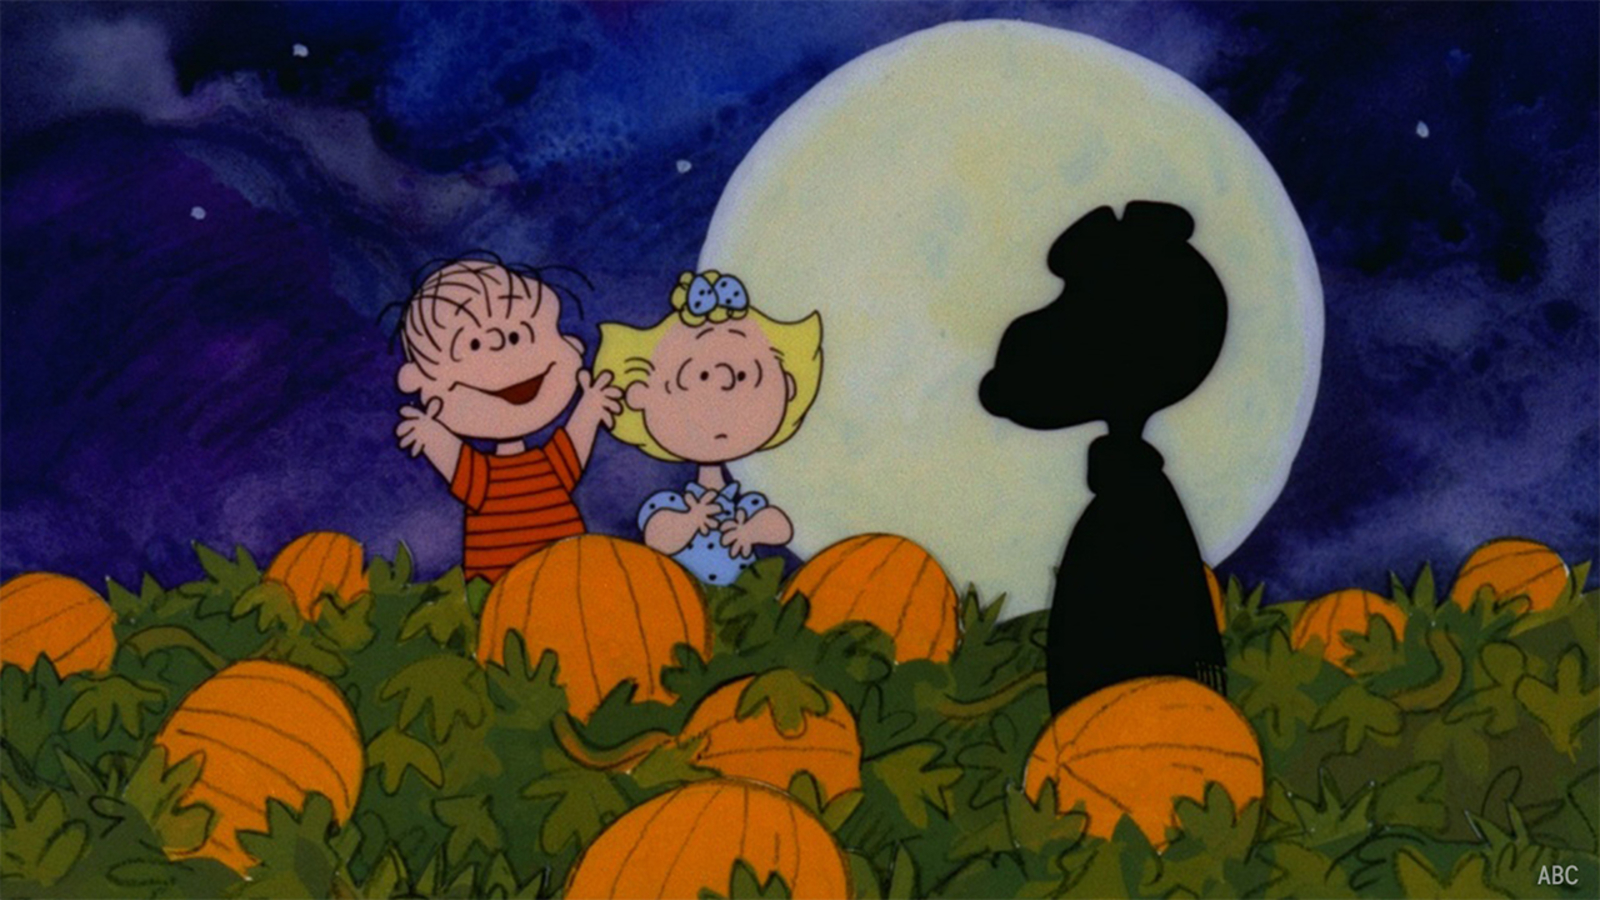 Charlie Brown Halloween special 'It's the Great Pumpkin, Charlie Brown': See ABC's full lineup of Halloween programming Los Angeles